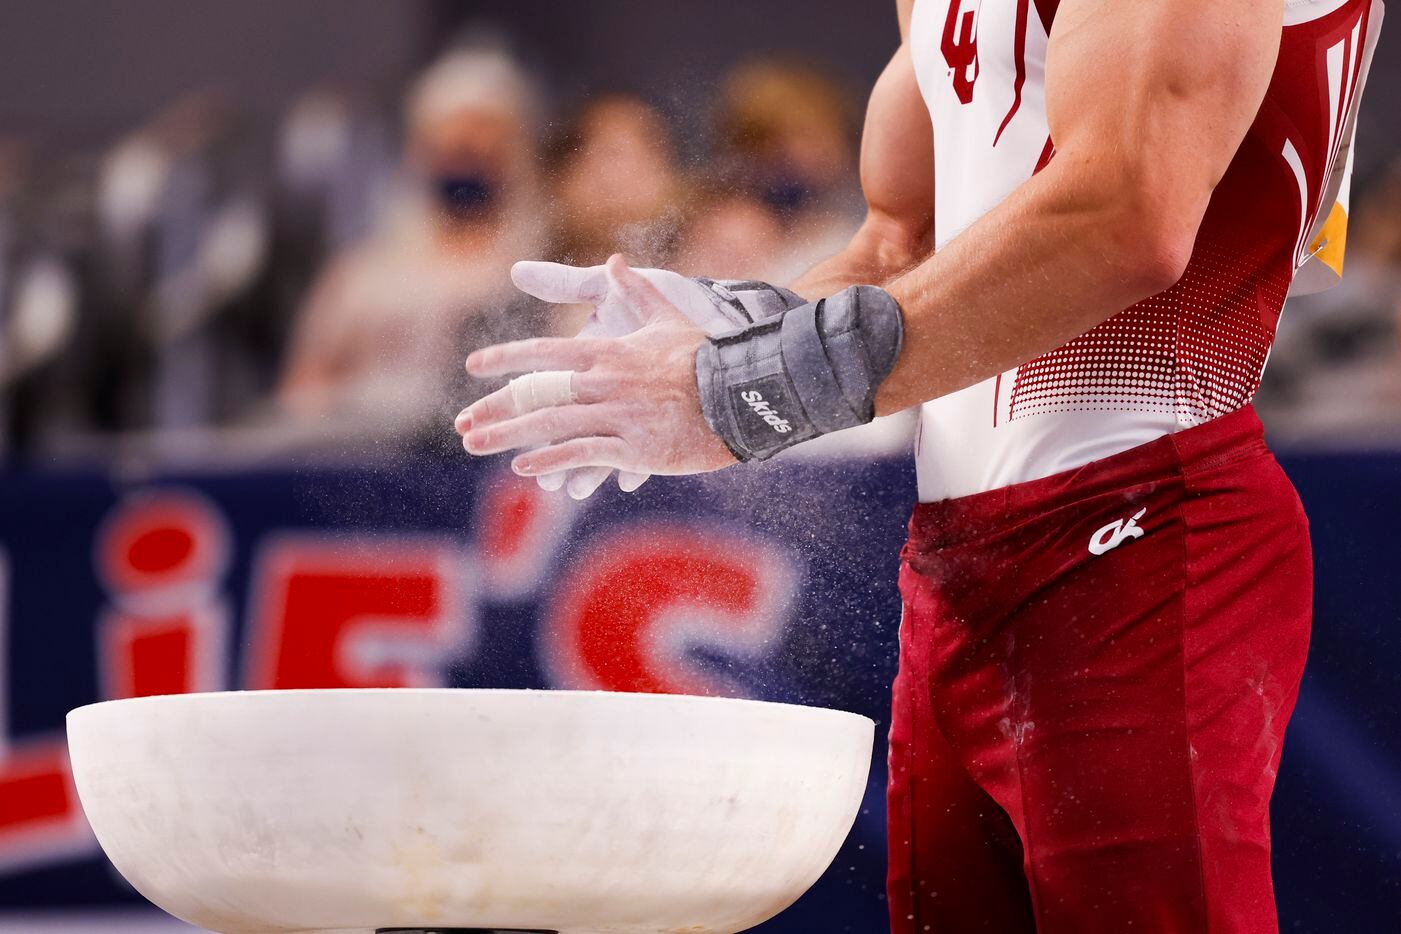 University of Oklahoma's Allan Bower chalks his hands before performing on the pommel horse during Day 1 of the US gymnastics championships on Thursday, June 3, 2021, at Dickies Arena in Fort Worth. (Juan Figueroa/The Dallas Morning News)